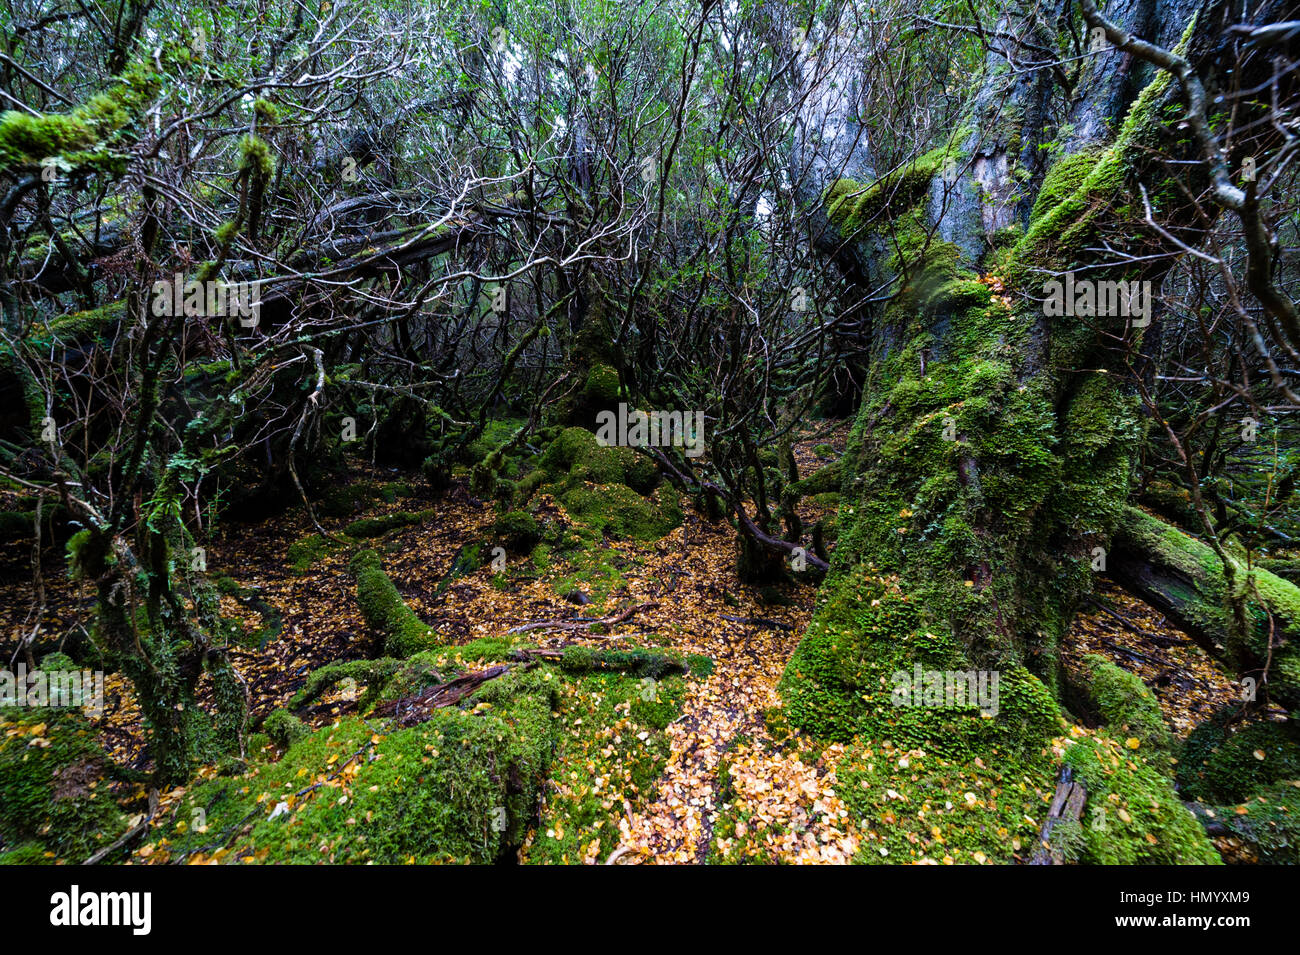 Fallen leaves from a deciduous Beech carpet the moss covered floor of a cool temperate rainforest. Stock Photo